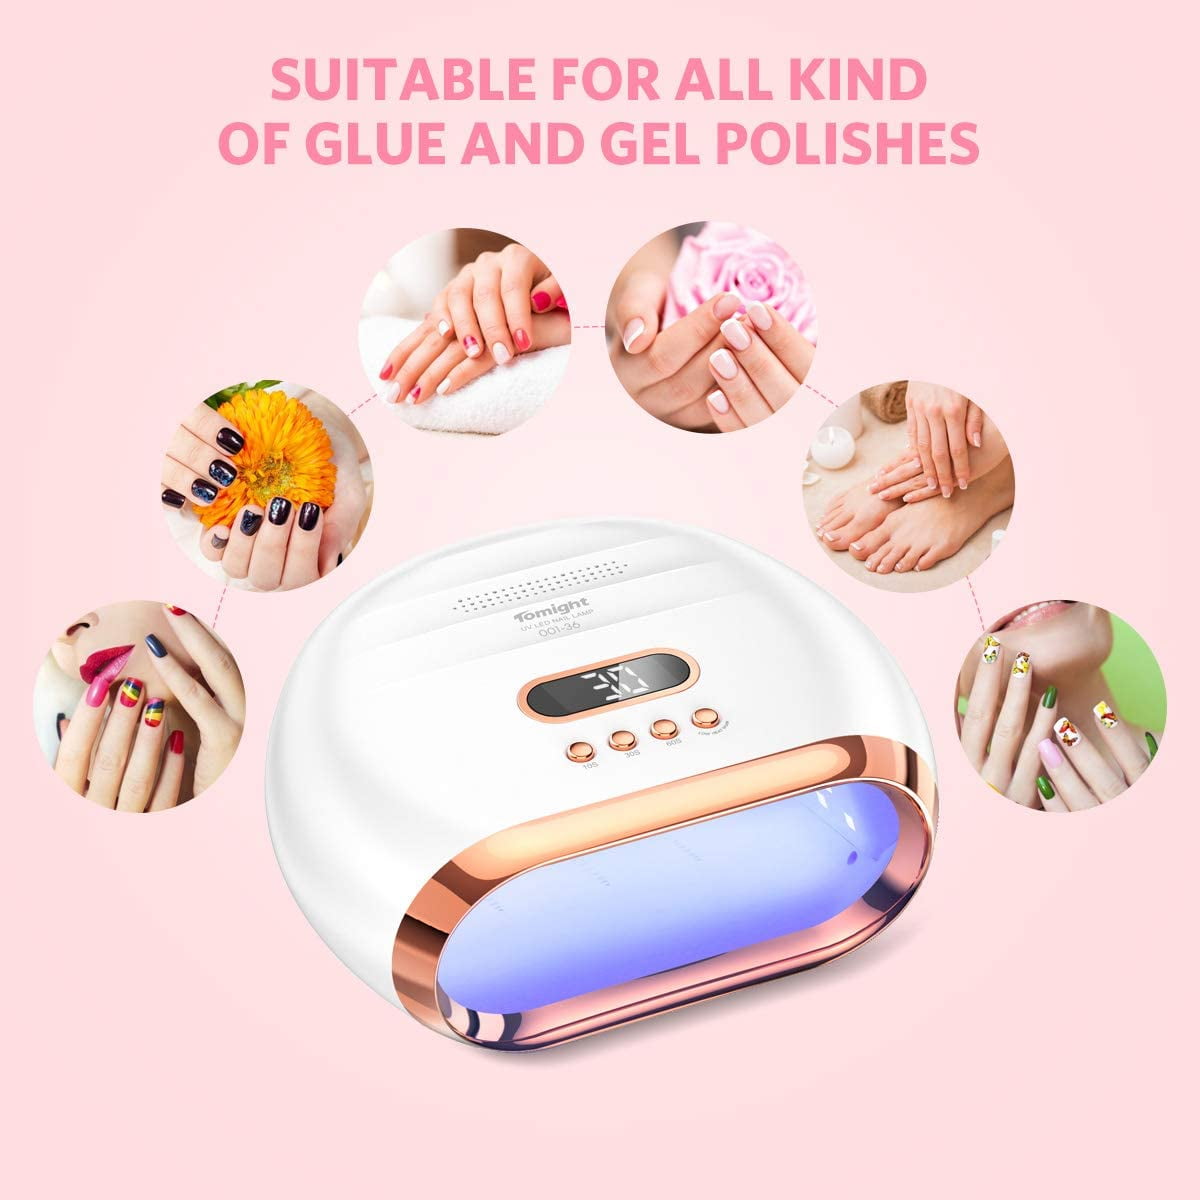 Bete Cordless LED Nail Lamp, Wireless Nail Dryer, 72W Rechargeable LED Nail Light, Portable Gel UV LED Nail Lamp with 4 Timer Setting Sensor and LCD